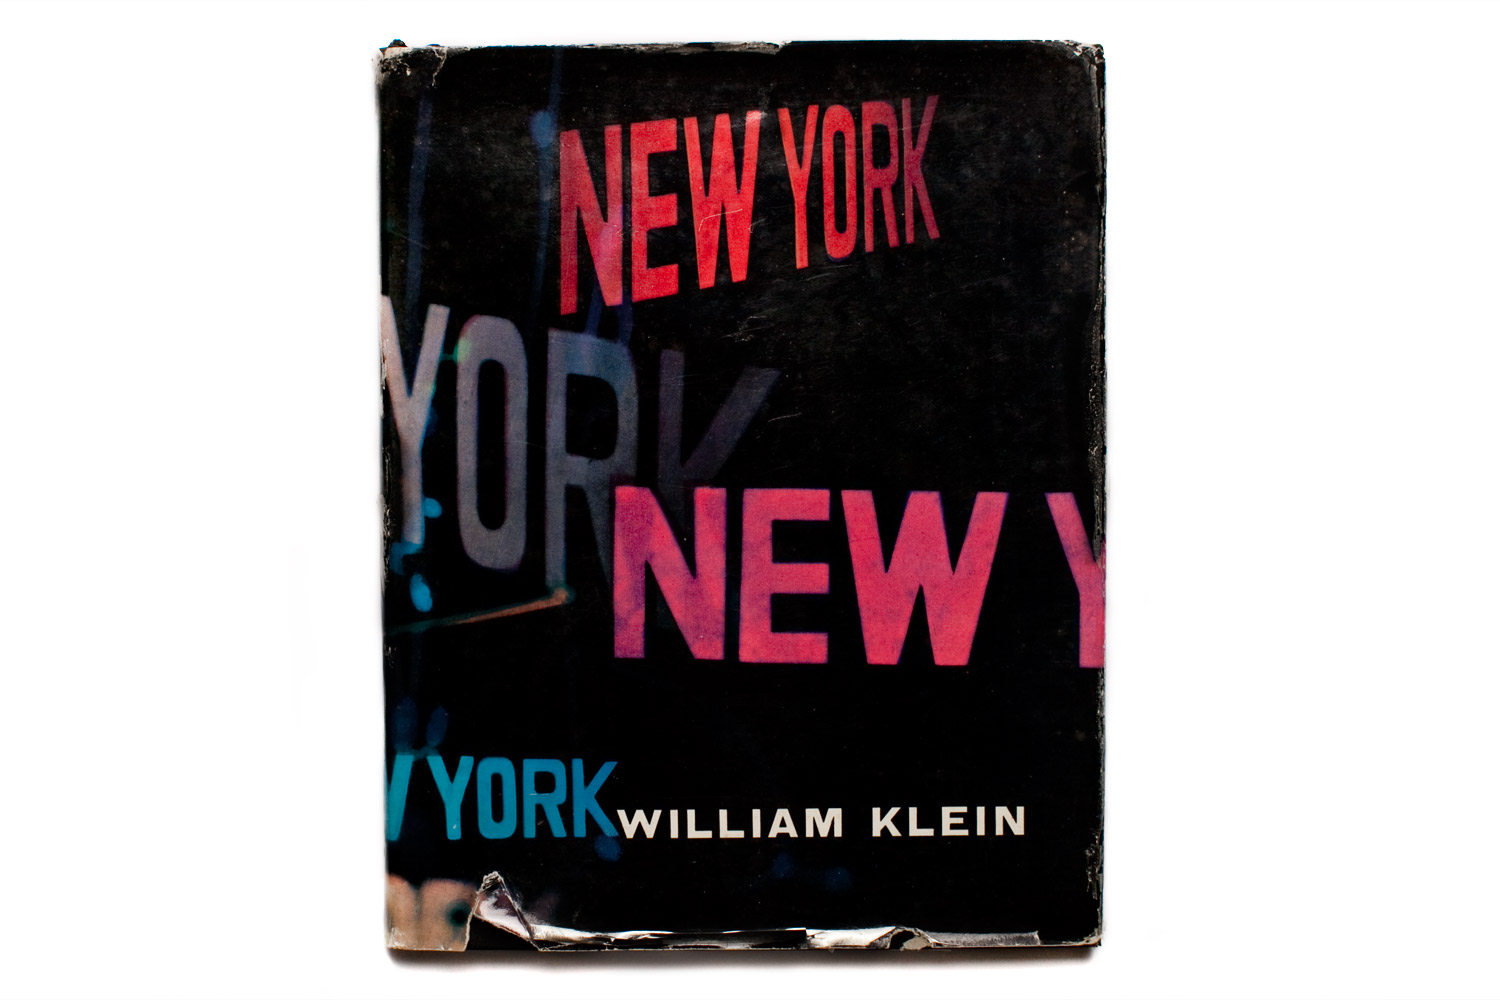 William Klein's masterwork Life is Good &amp; Good for You in New York, first published in 1956.